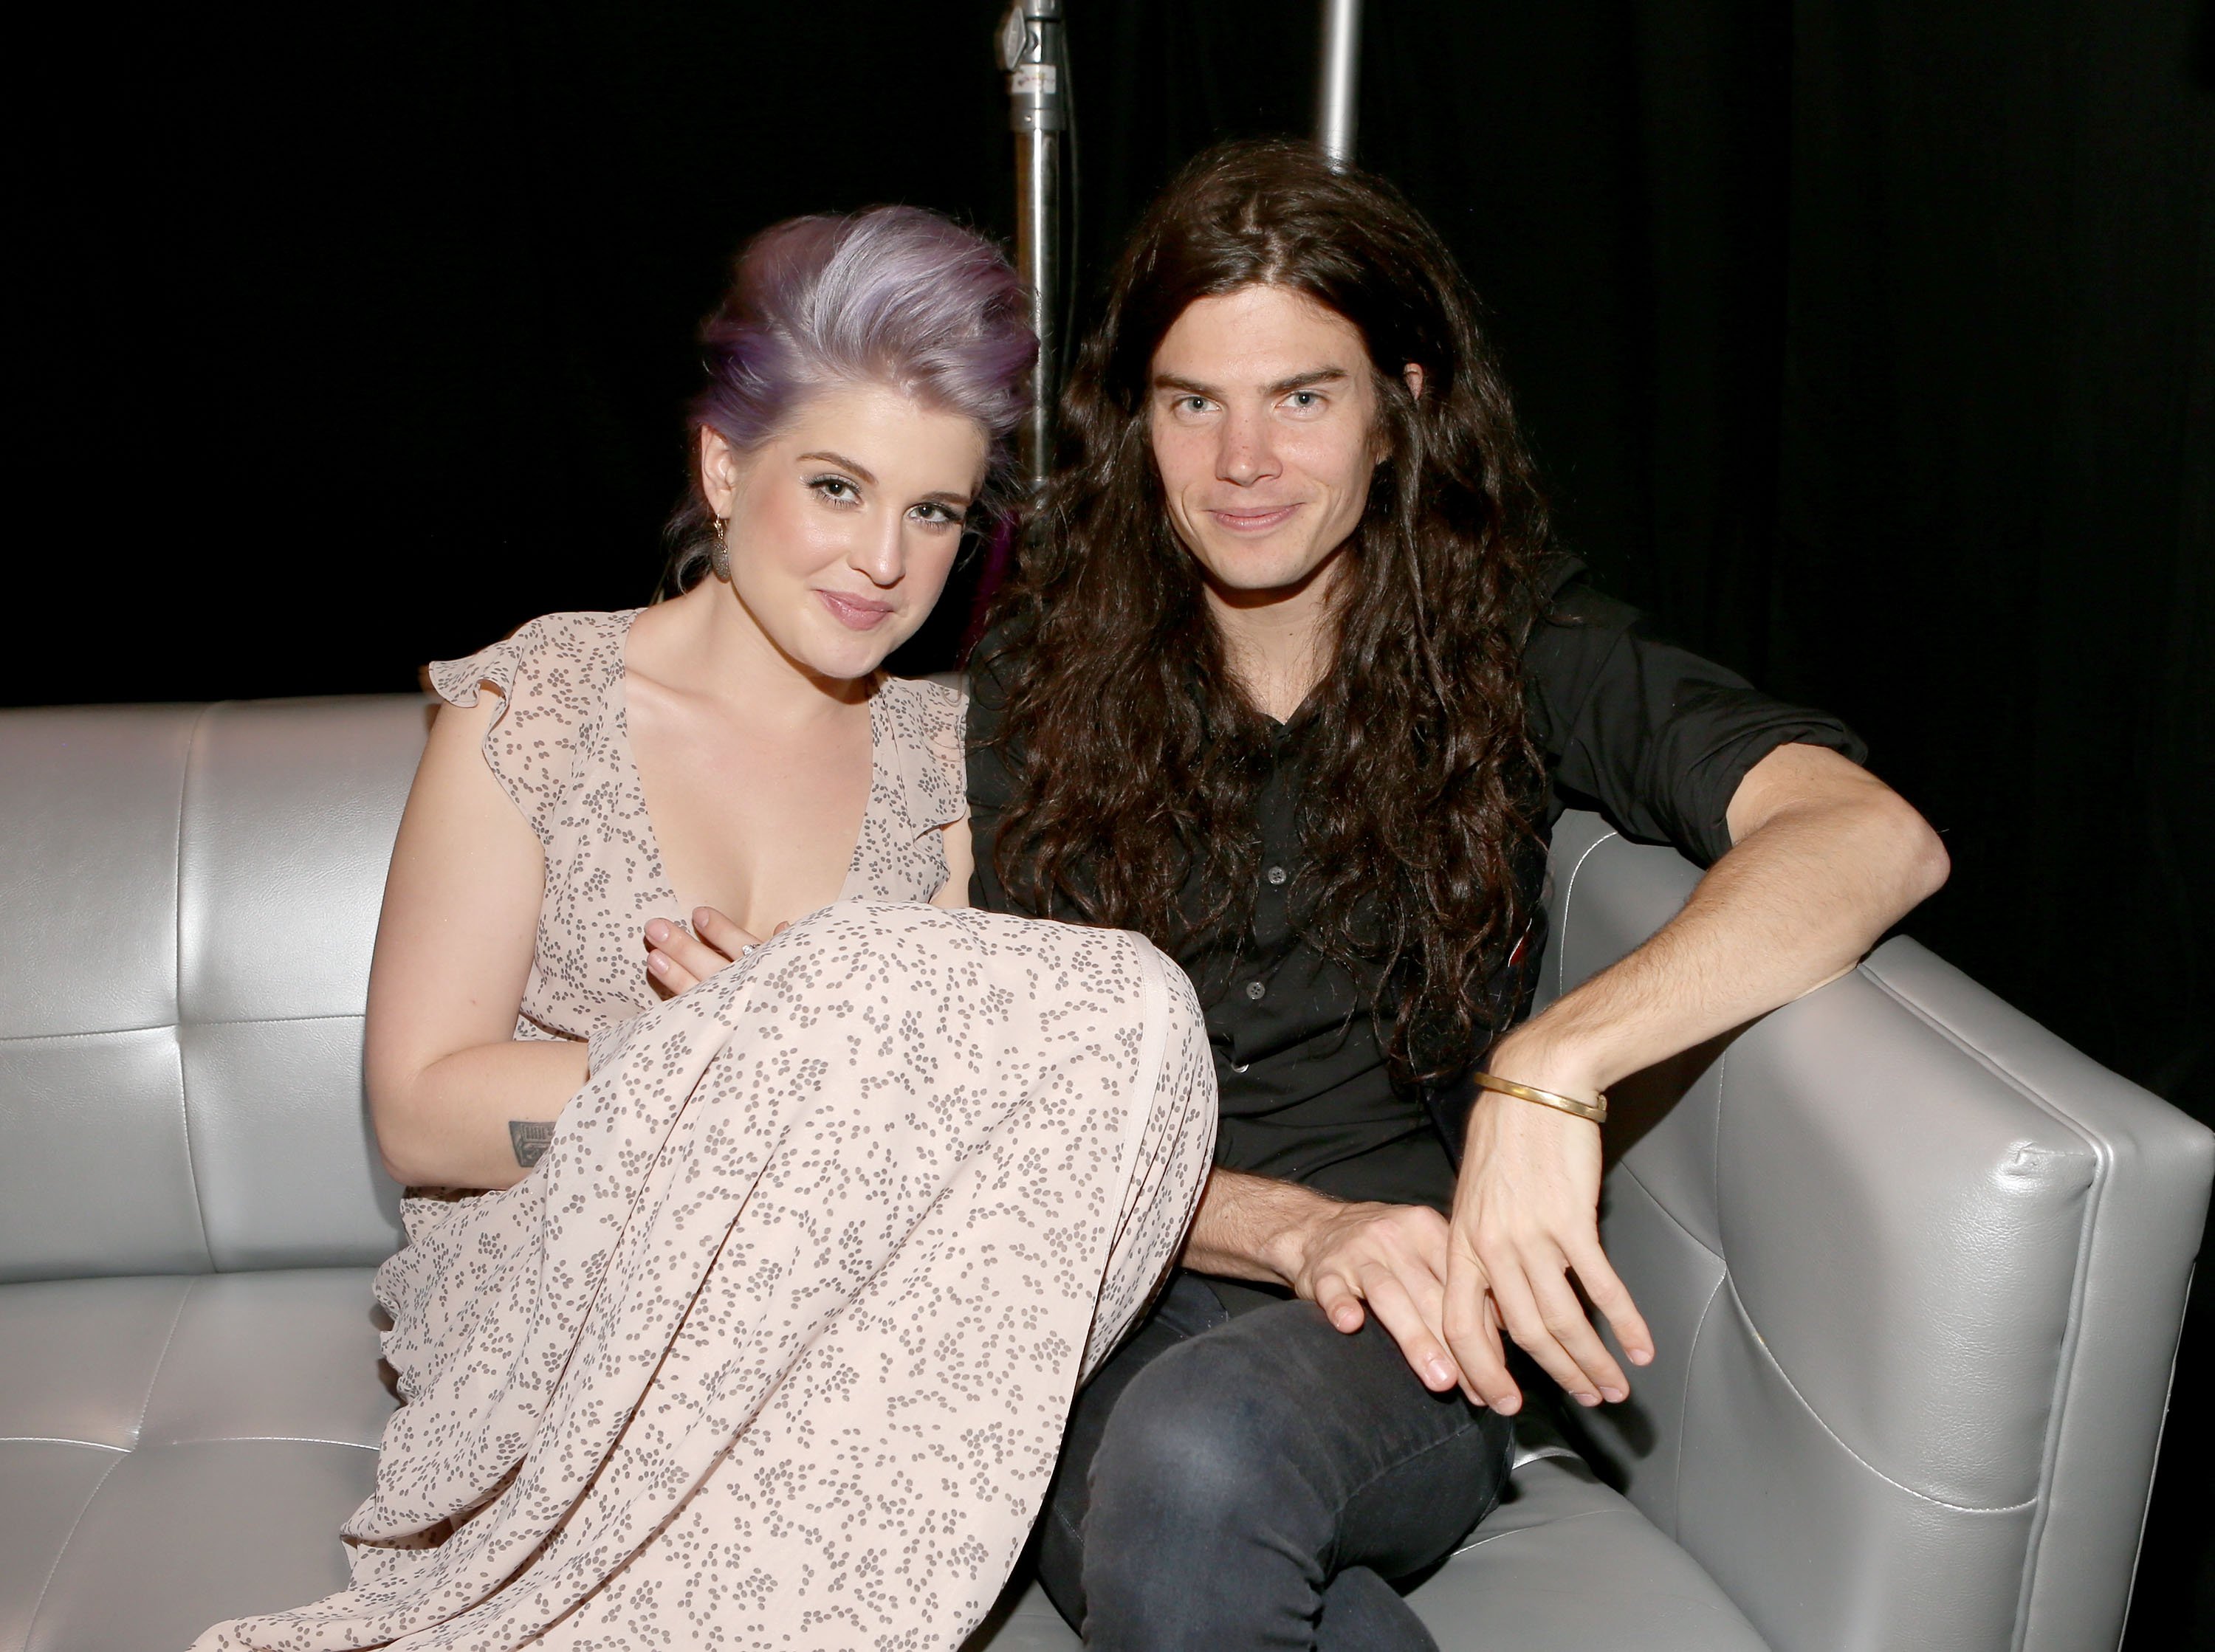 Television personality Kelly Osbourne and chef Matthew Mosshart at the 2012 Do Something Awards at Barker Hangar on August 19, 2012 in Santa Monica, California. | Source: Getty Images